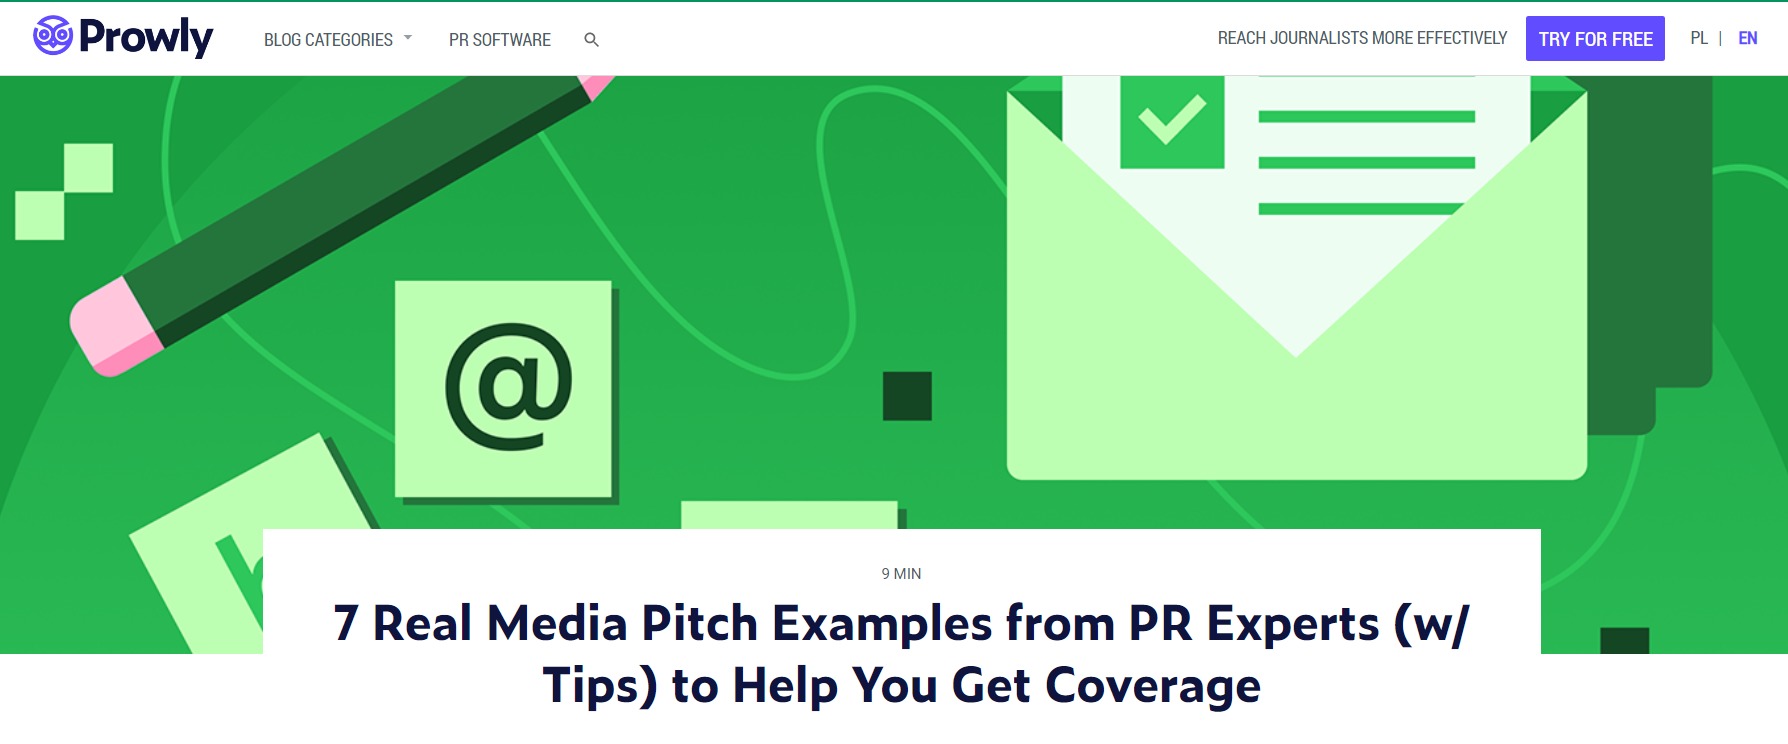 Prowly media pitch templates